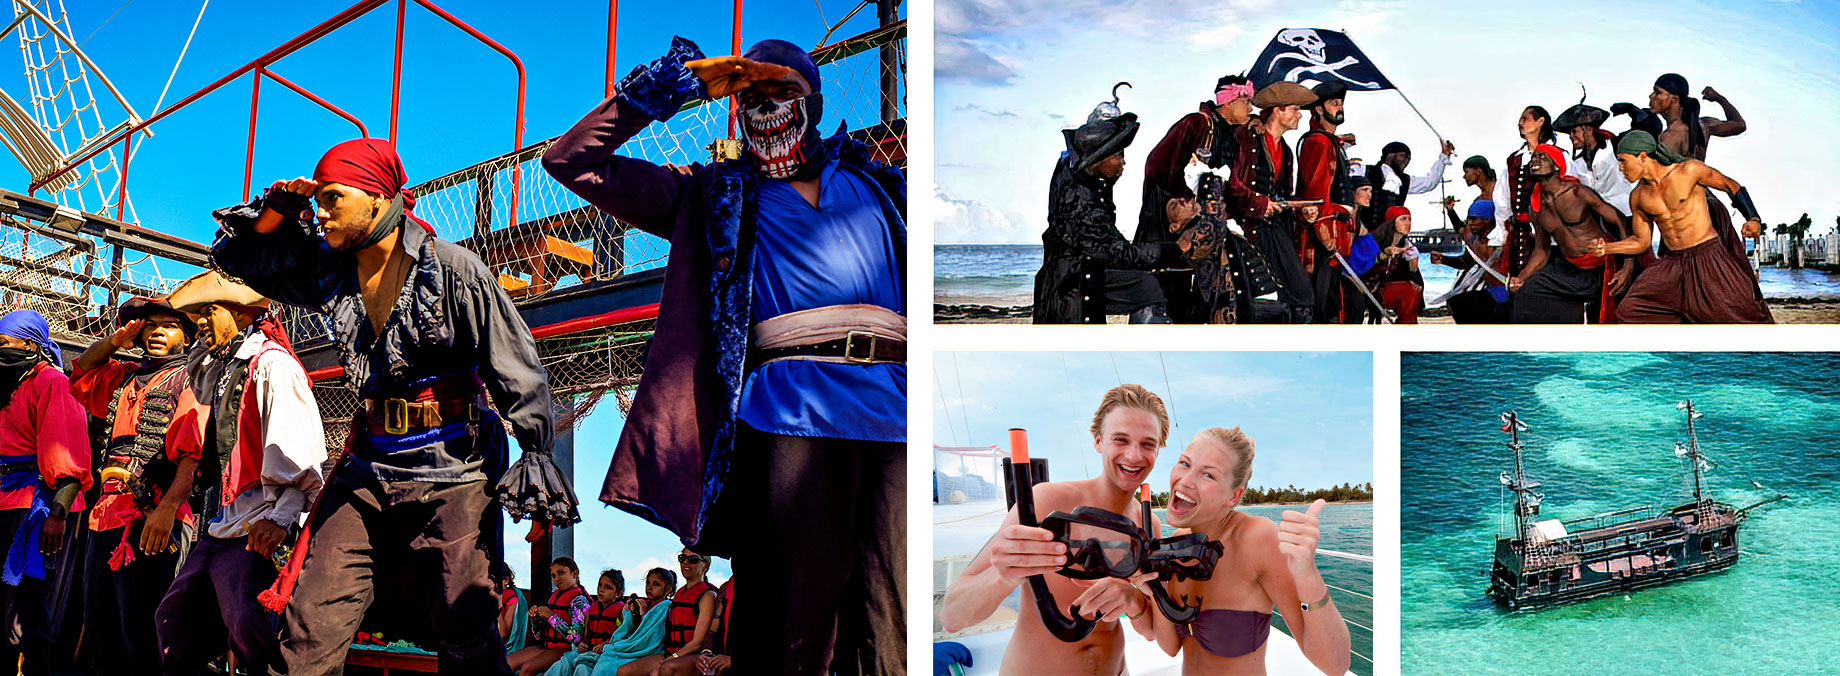 Pirates Tour and Snorkelling at Ocean Adventures Punta Cana, Dominican Republic